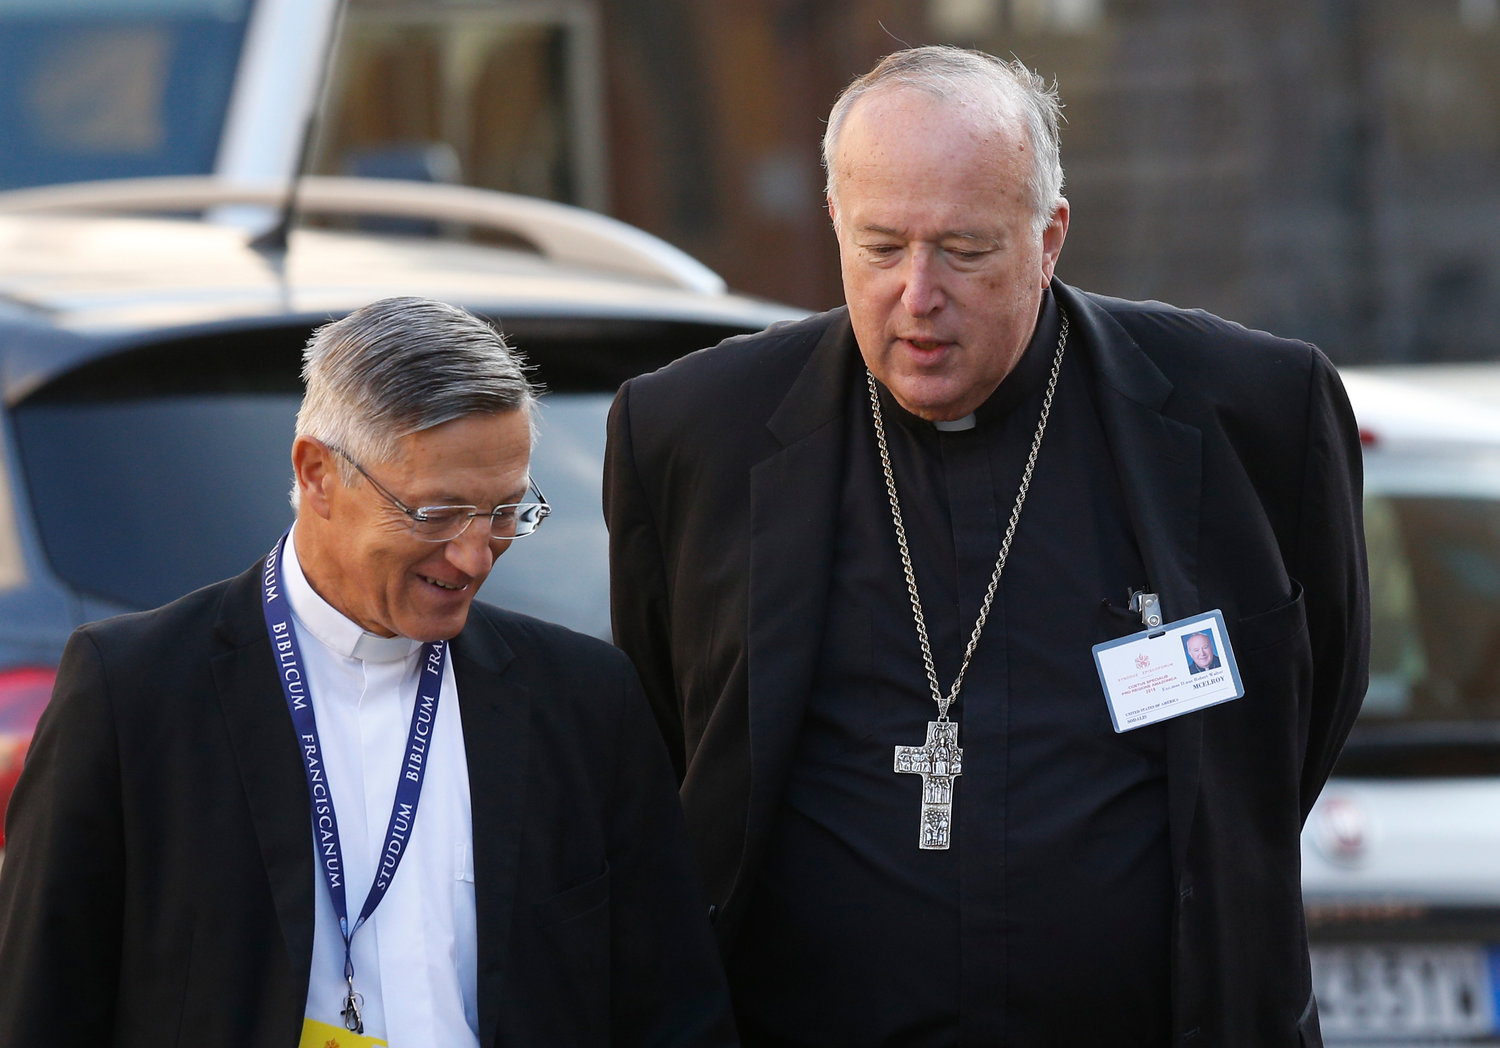 Bishop Robert W. McElroy of San Diego talks with Father Bernardo Estrada as they arrive for a session of the Synod of Bishops for the Amazon at the Vatican Oct. 15, 2019.